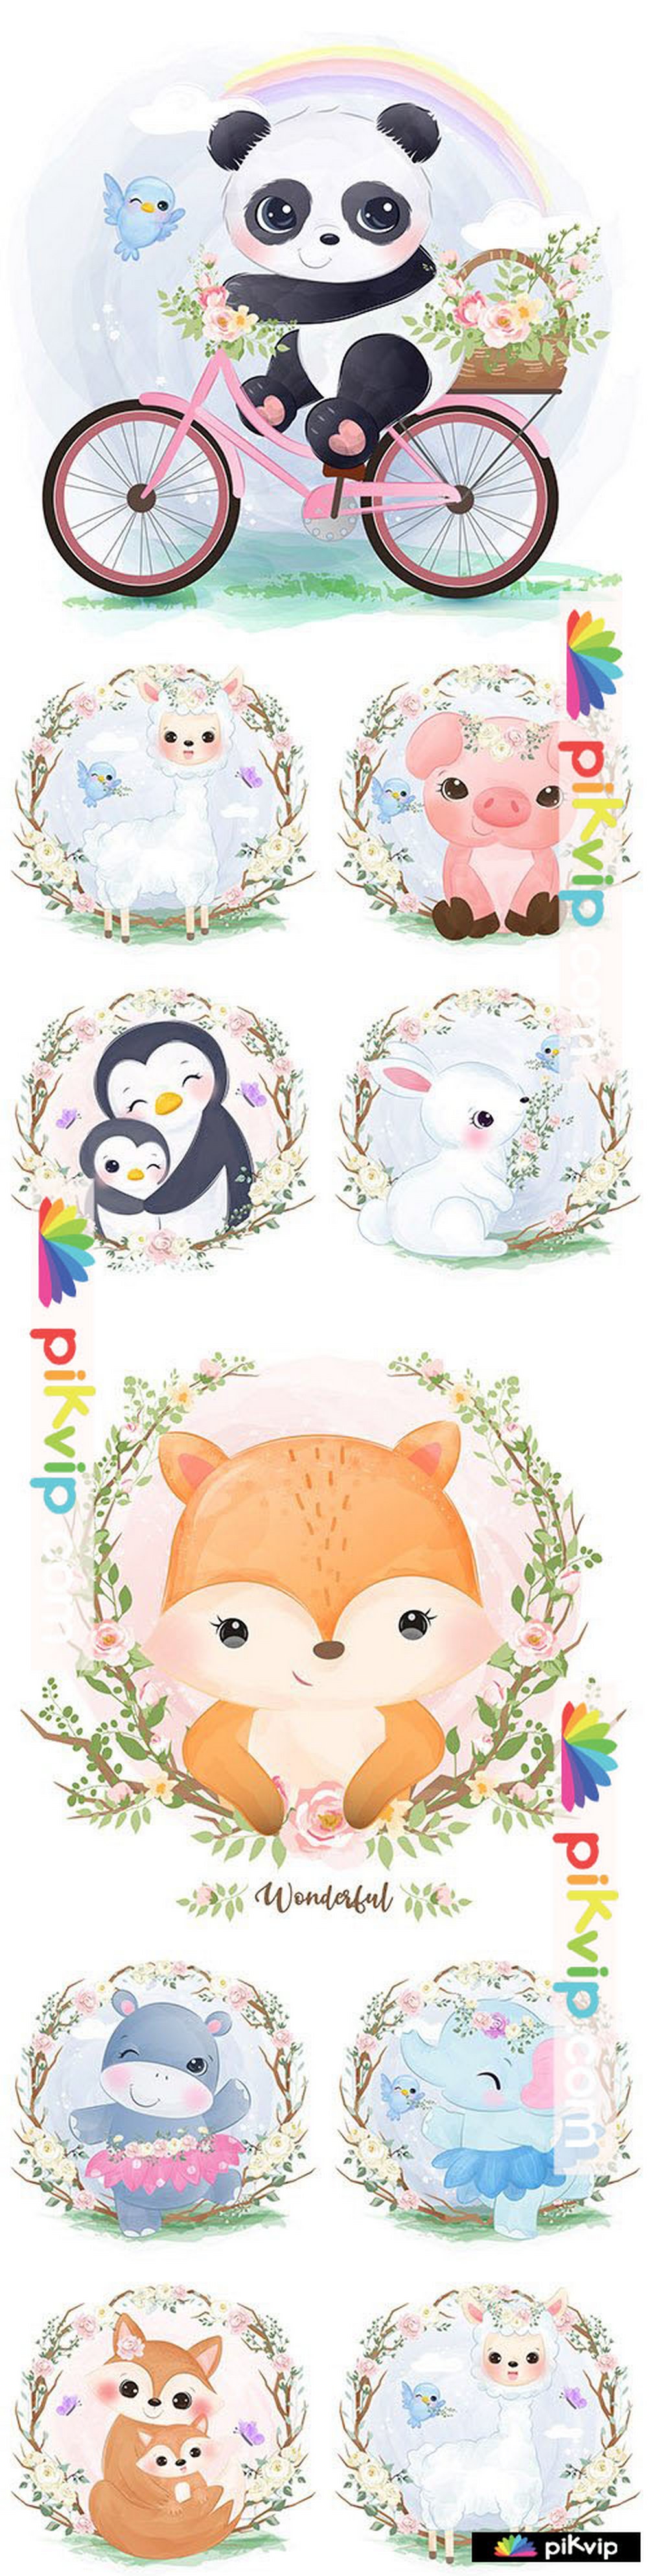 Cute animal mother and baby in flower frame watercolor illustration